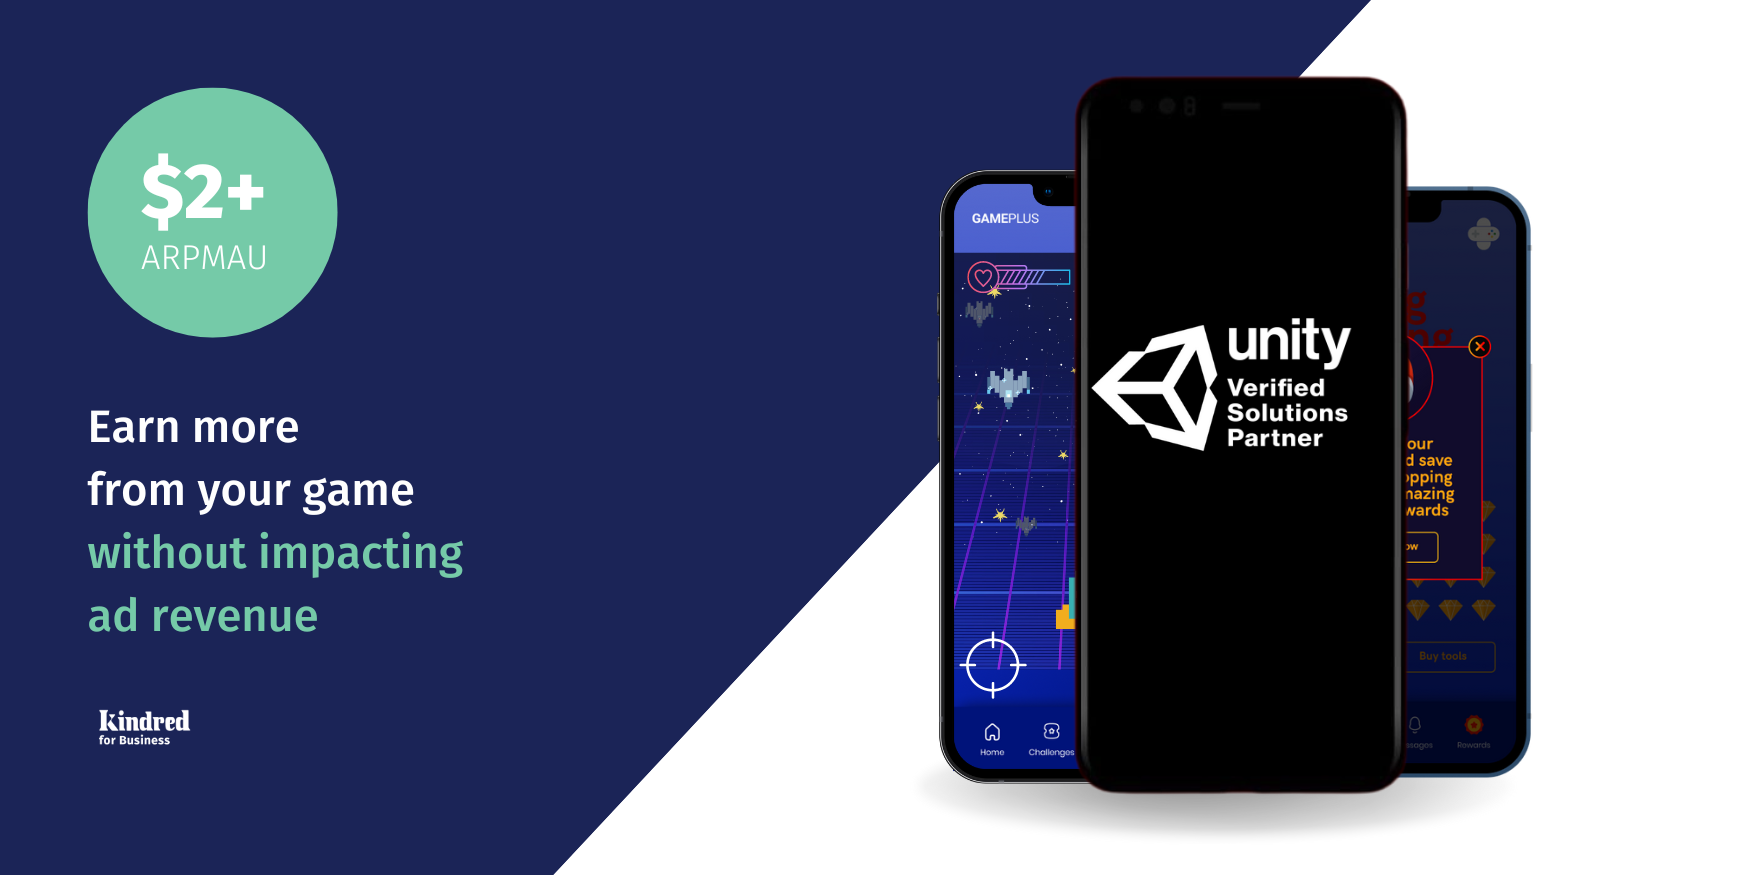 App Developer Magazine/ Unity partners with Kindred to reinvent app monetization - Kindred for Business